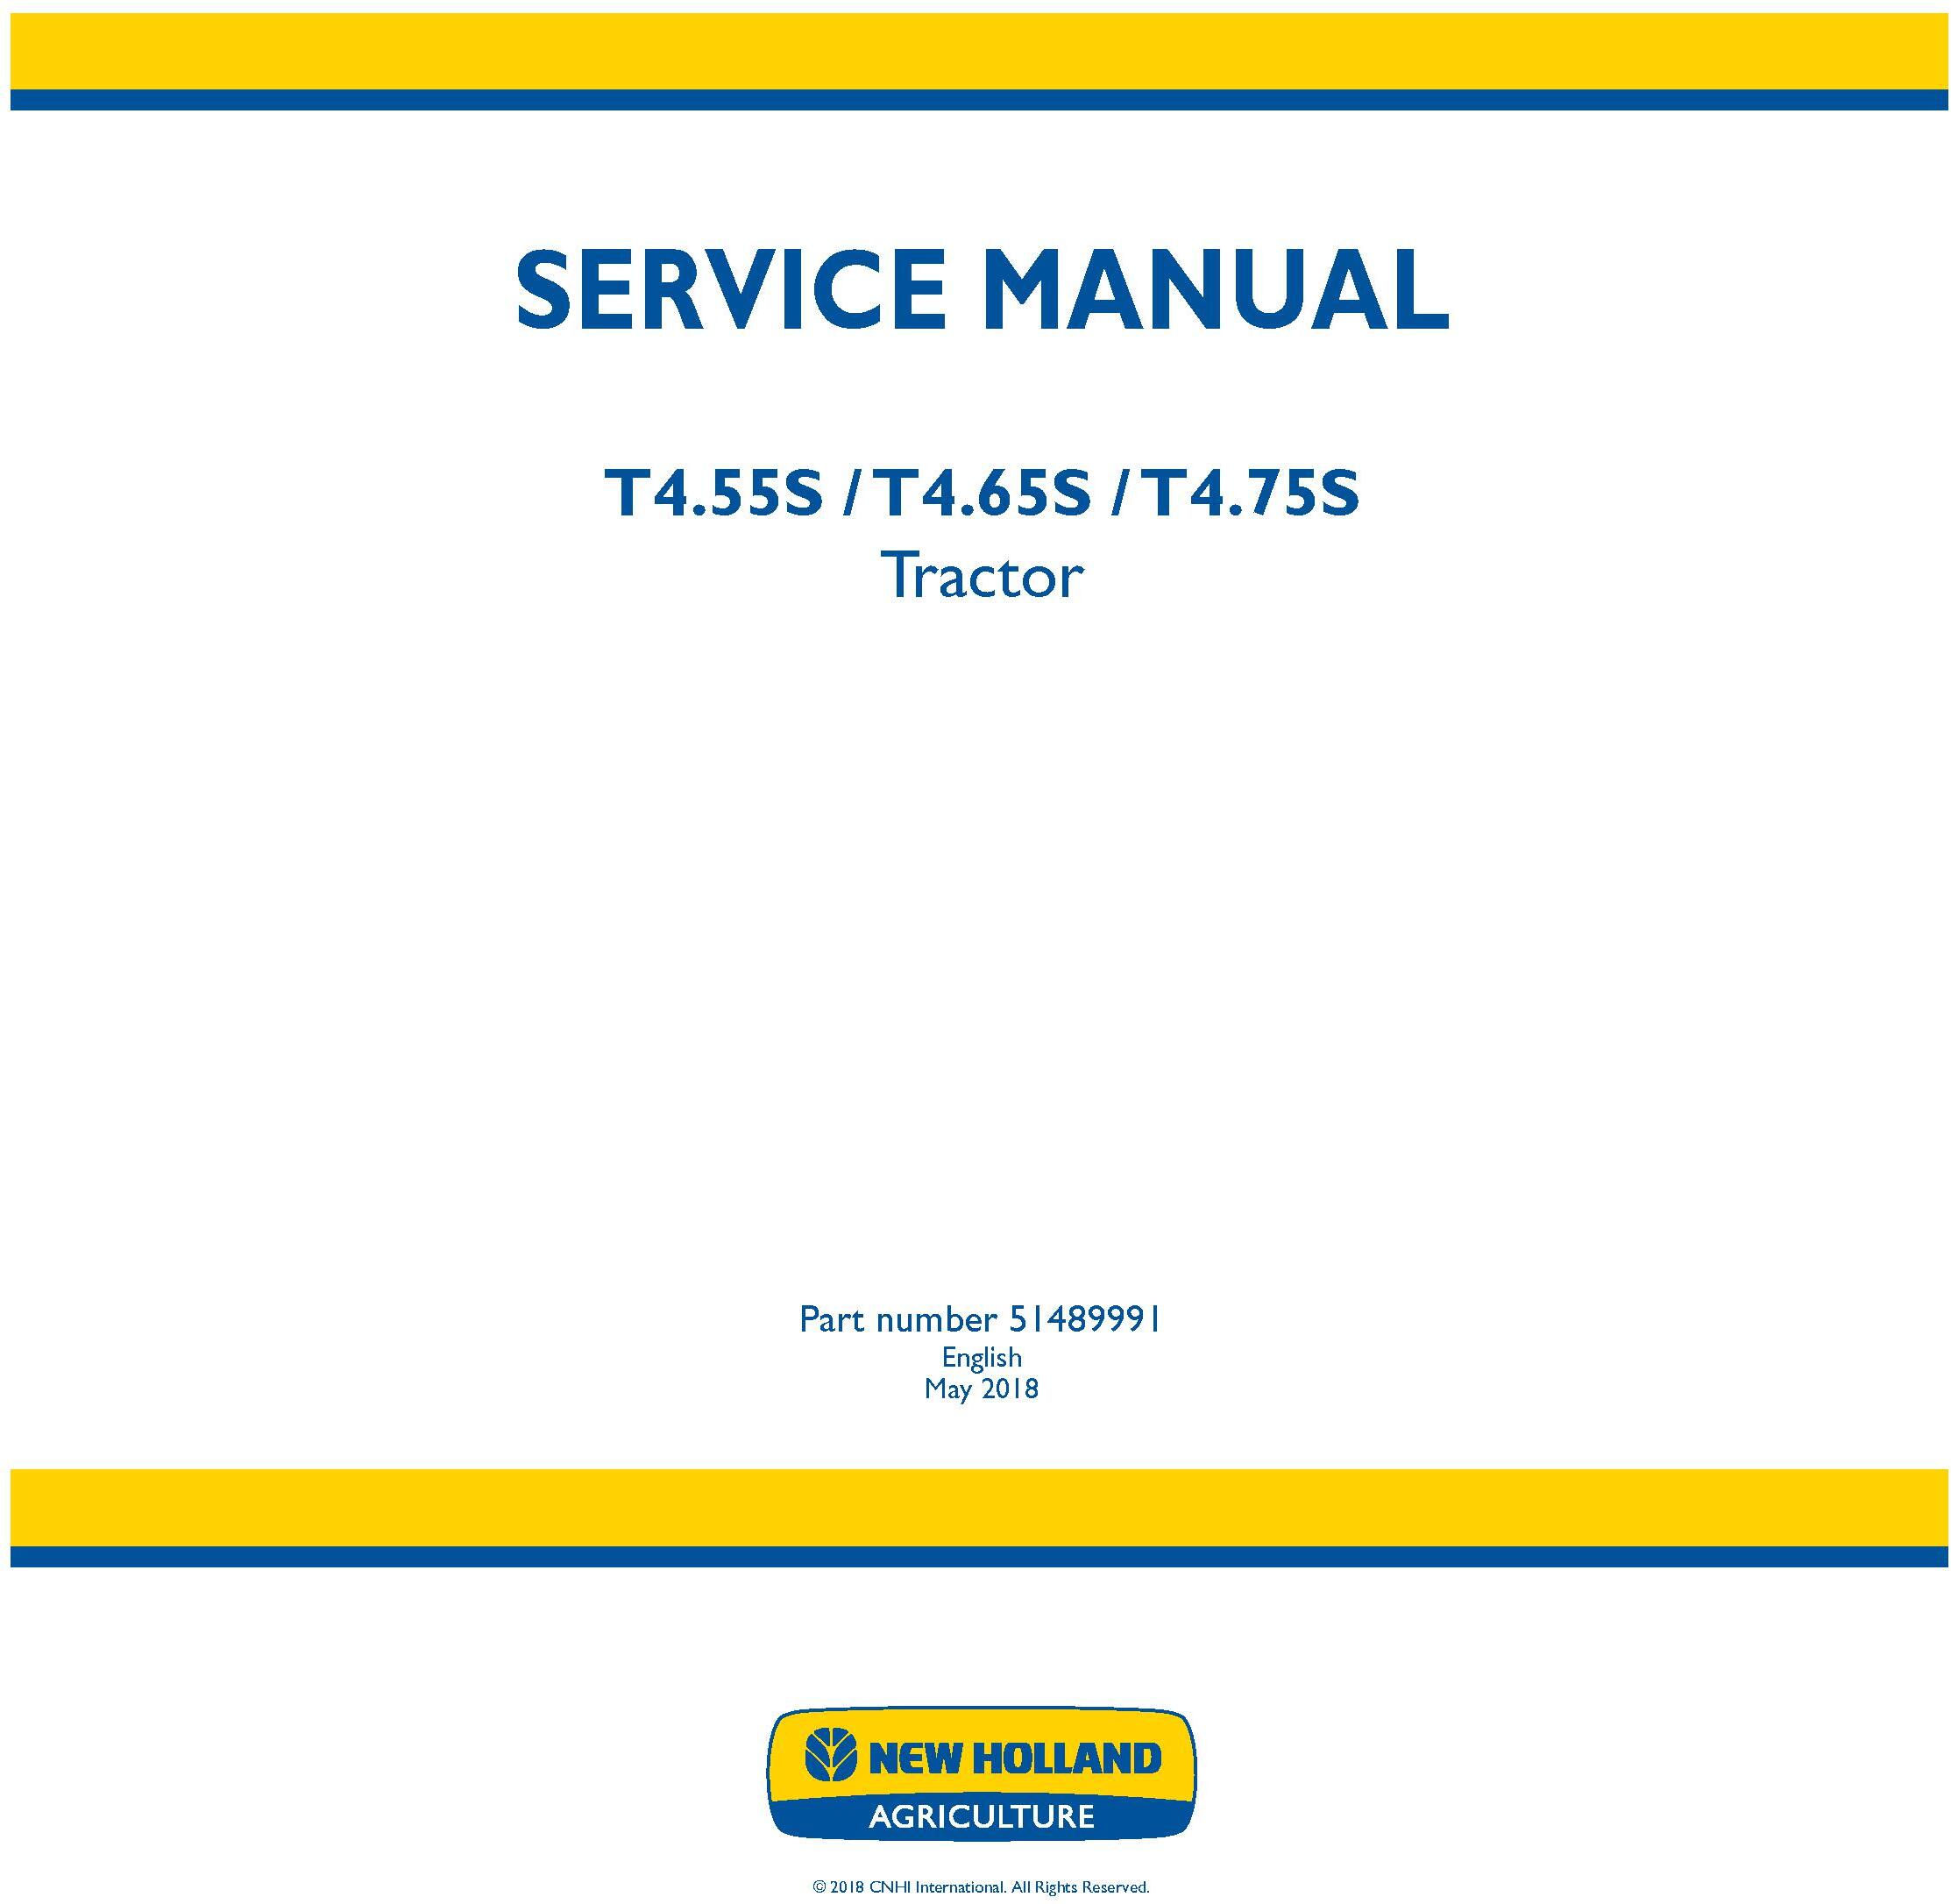 New Holland T4.55S, T4.65S, T4.75S Tractor Service Manual (Australia, New Zeland) - 19516